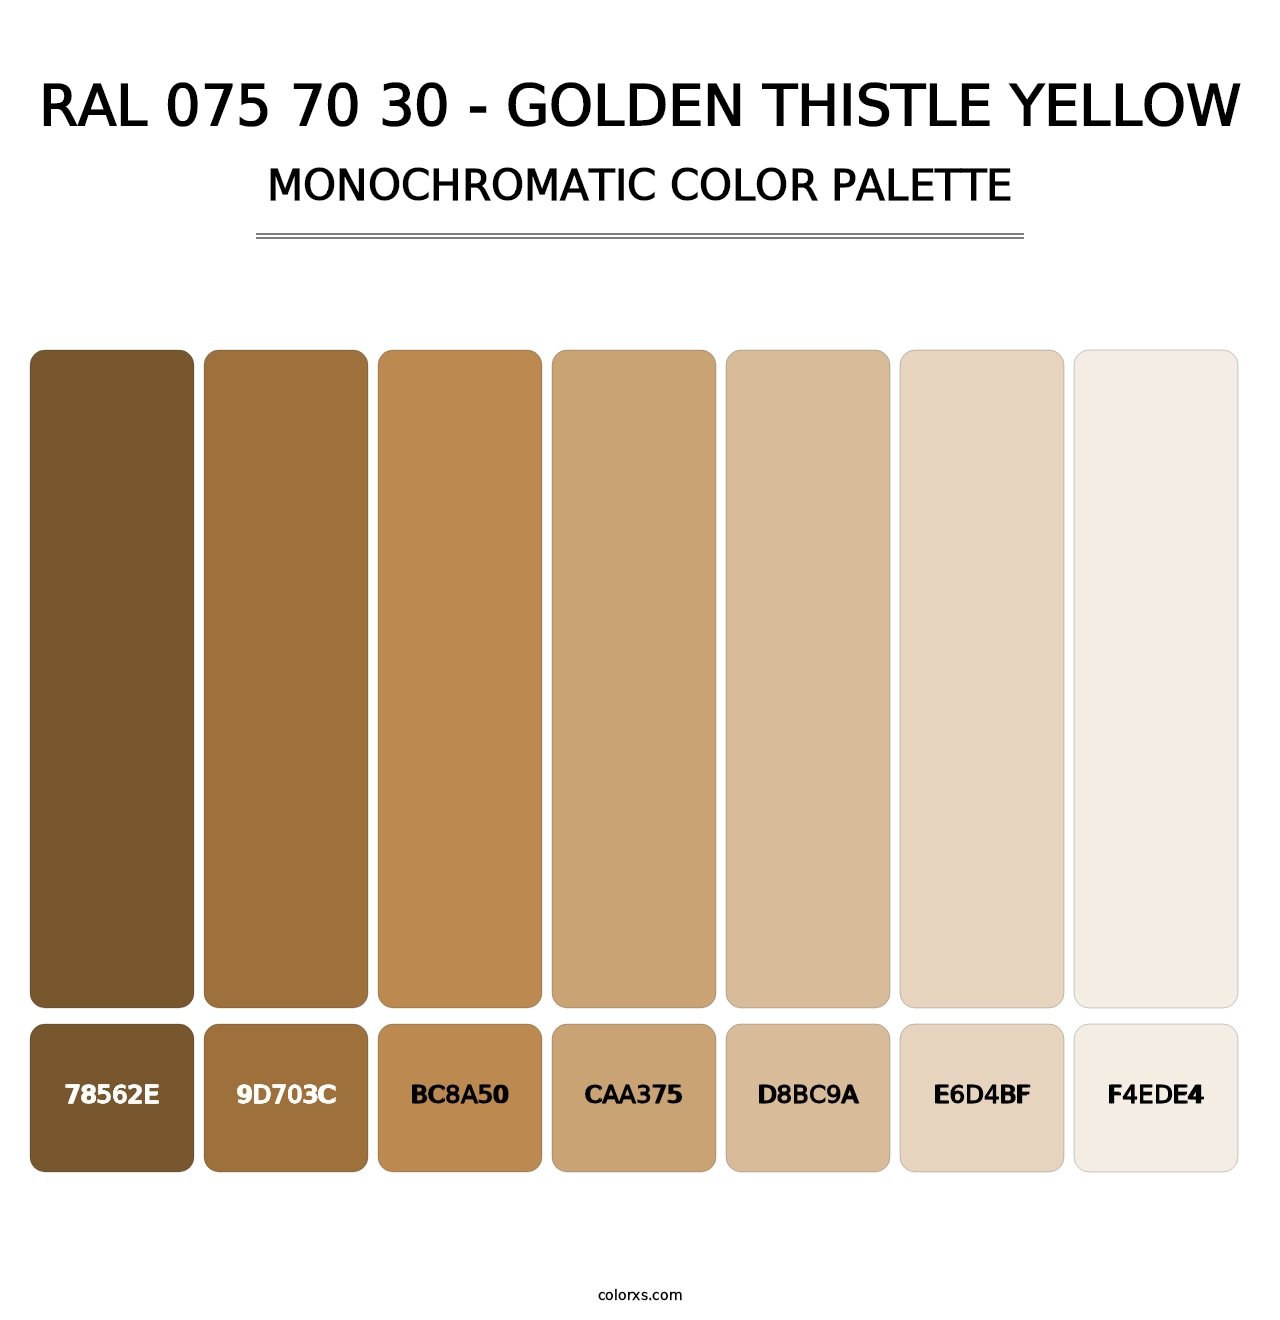 RAL 075 70 30 - Golden Thistle Yellow - Monochromatic Color Palette